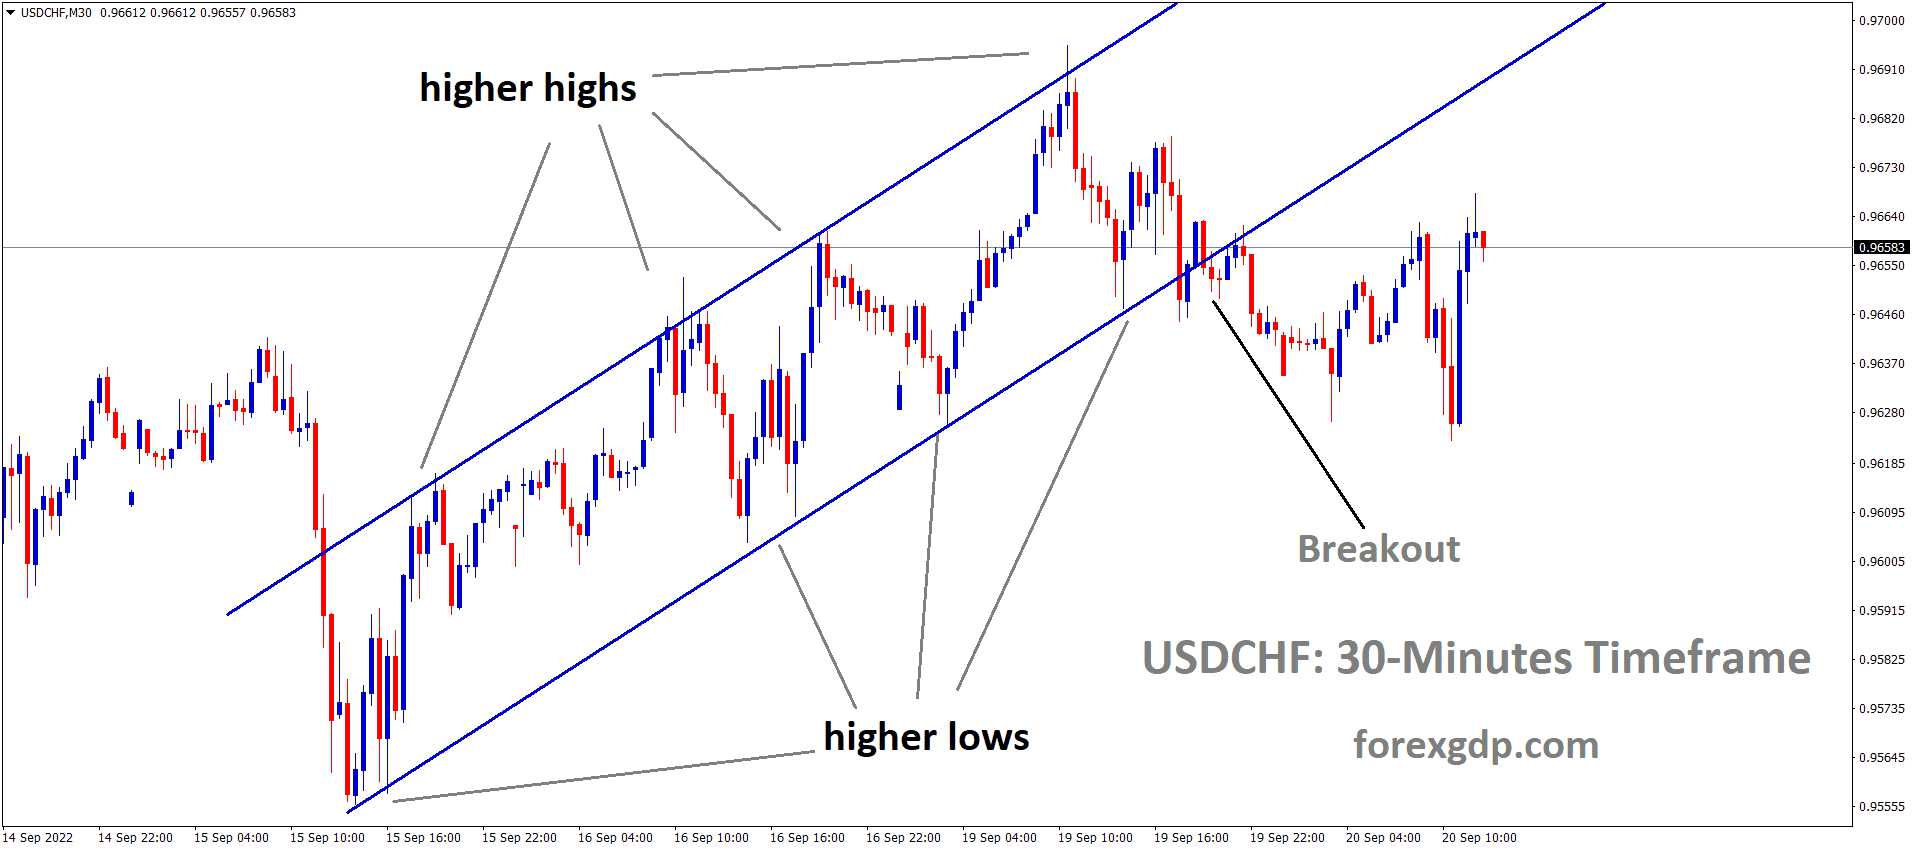 USDCHF is moving in an Ascending channel and the market has rebounded from the higher low area of the channel.